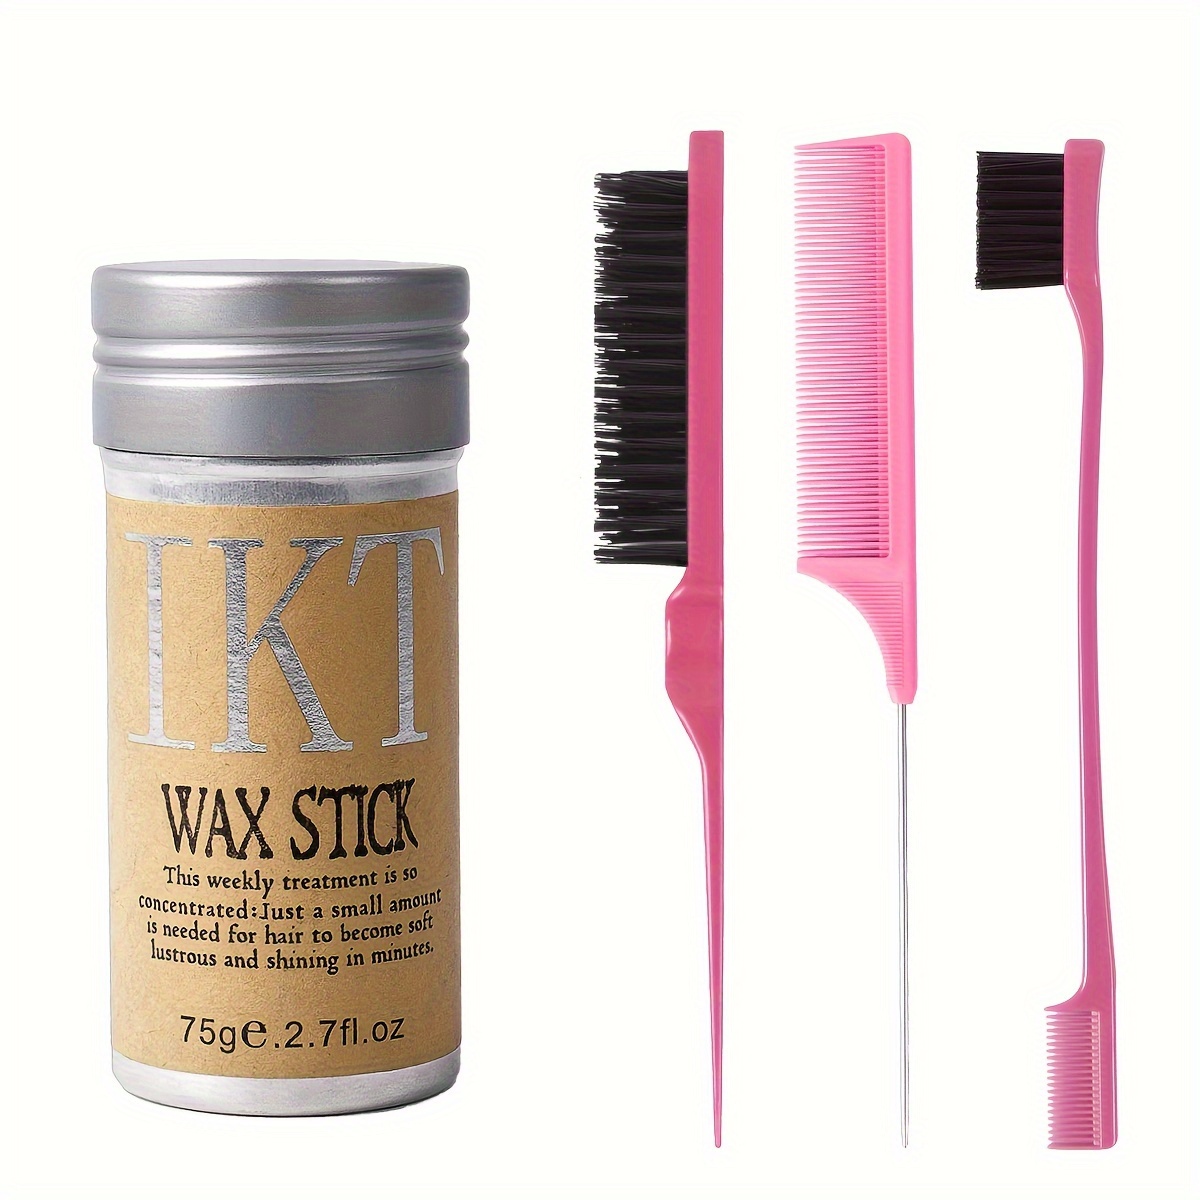 

4pcs/set Hair Wax Stick With Slick Back Hair Brushes, Hair Pomade Stick Long-lasting Styling Wax Stick With Hair Styling Combs For Hair & Wigs Flyaways Frizz Hair